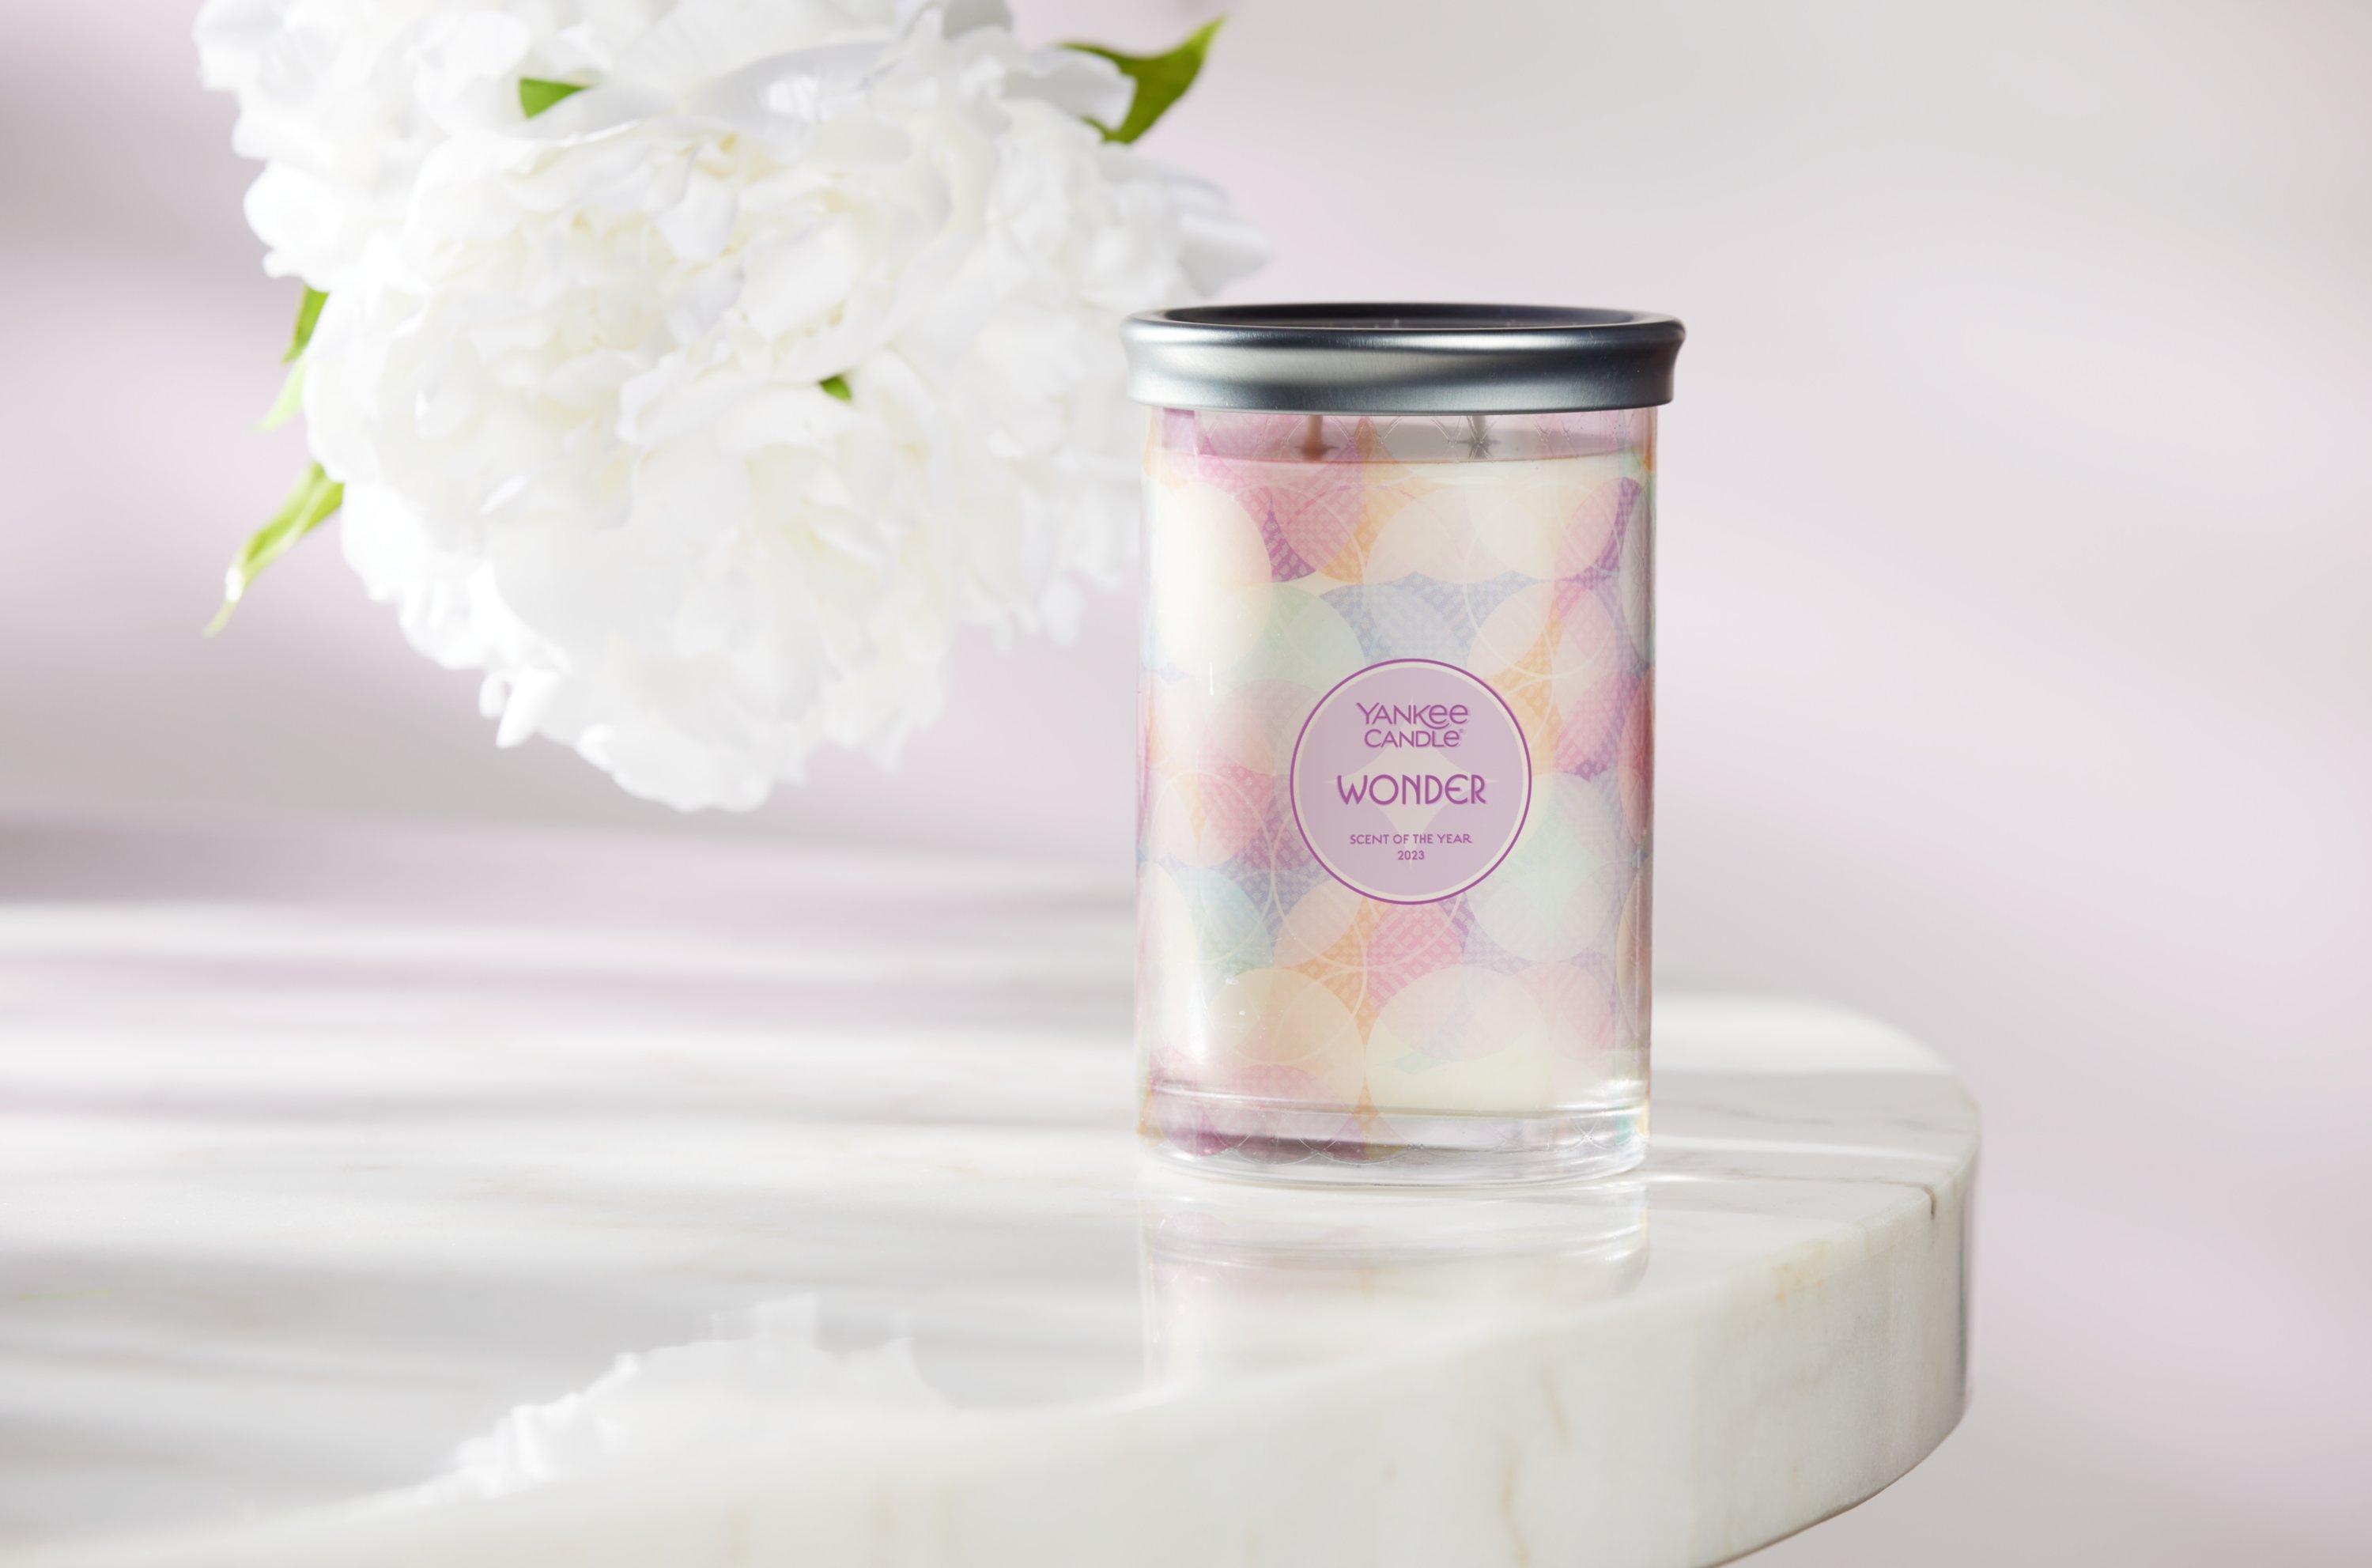  Park Scents 100 Years of Wonder Candle - Beautiful